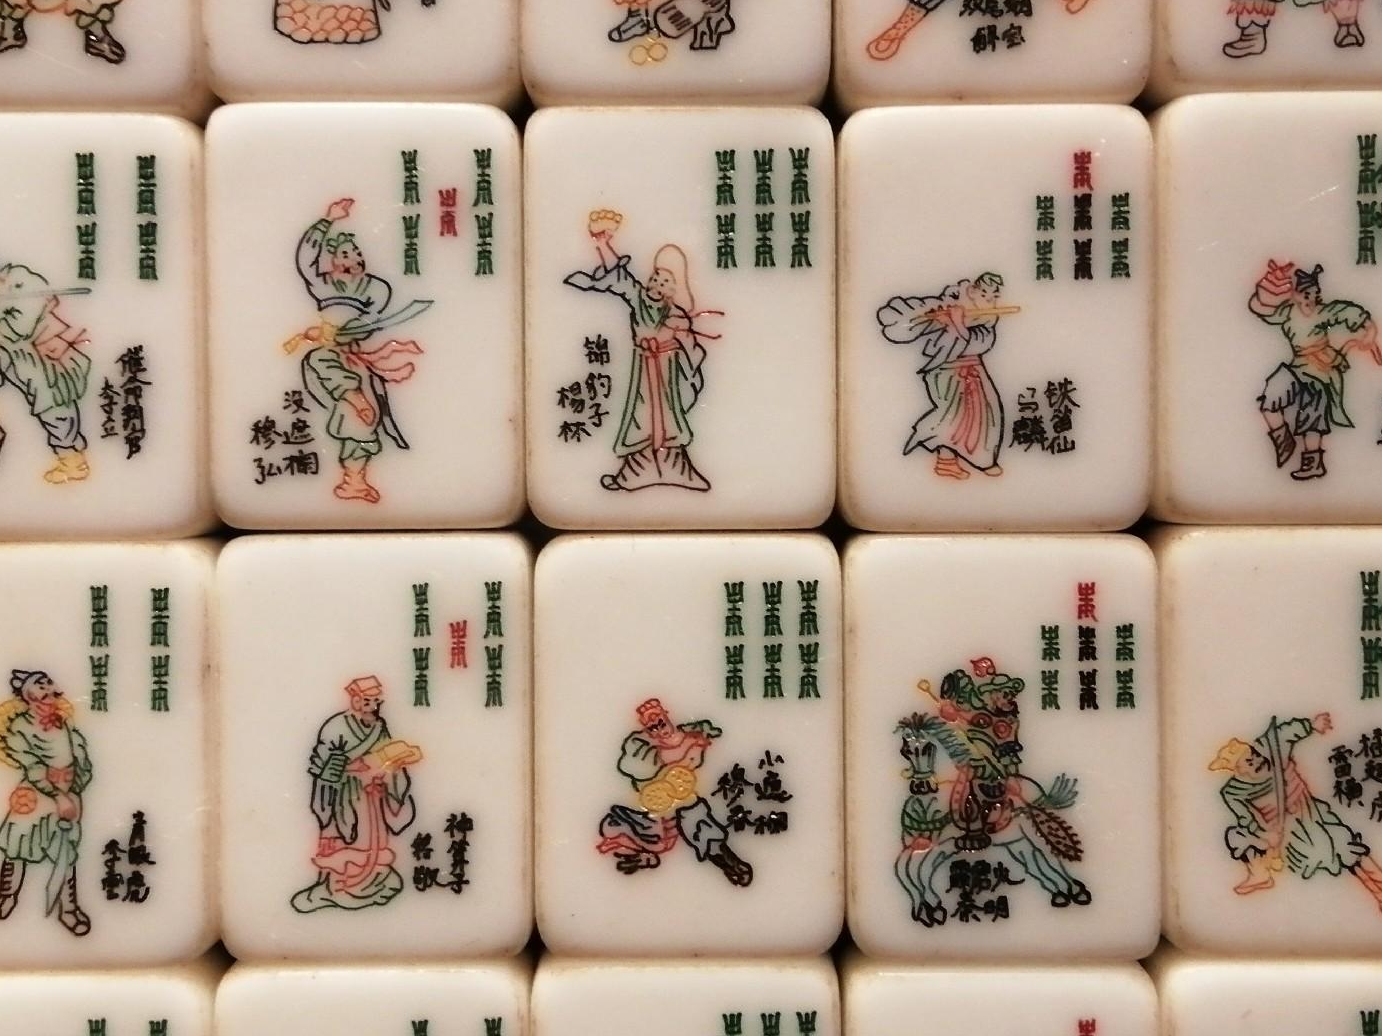 Travelogue: Mahjong, one of China's most popular table games - CGTN